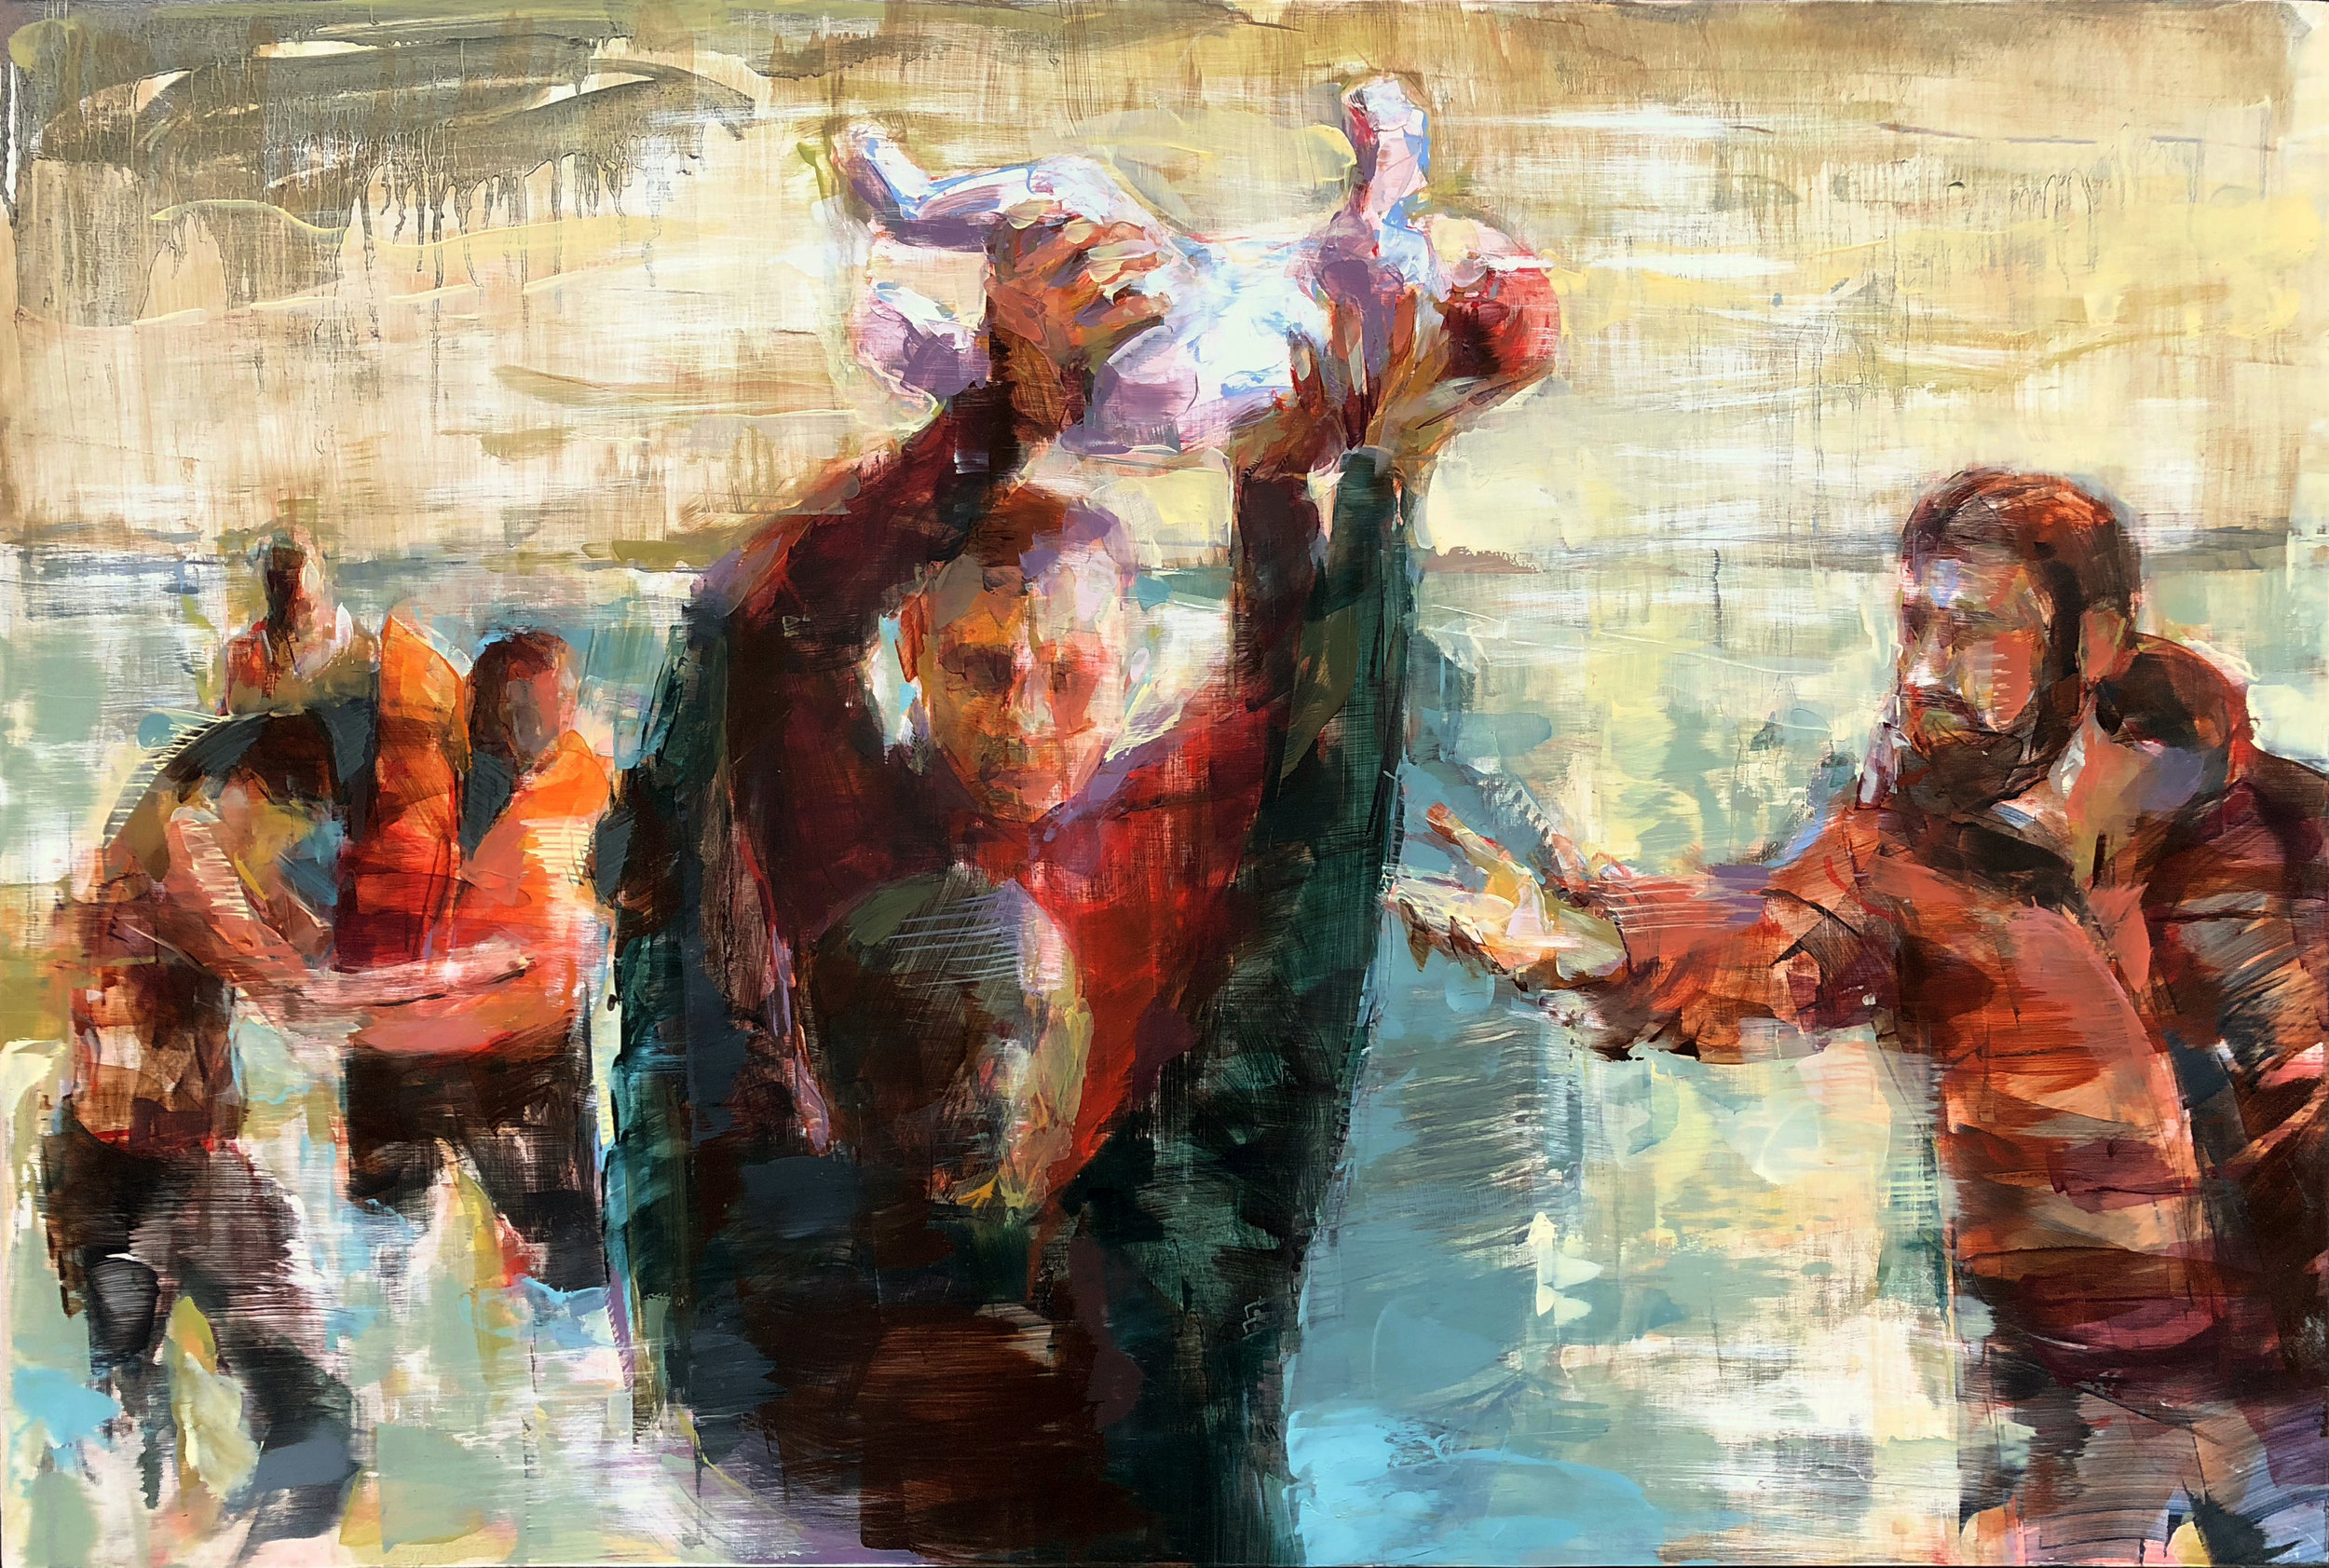   Helping Hands  2019 Oil on panel 29" x 40" 